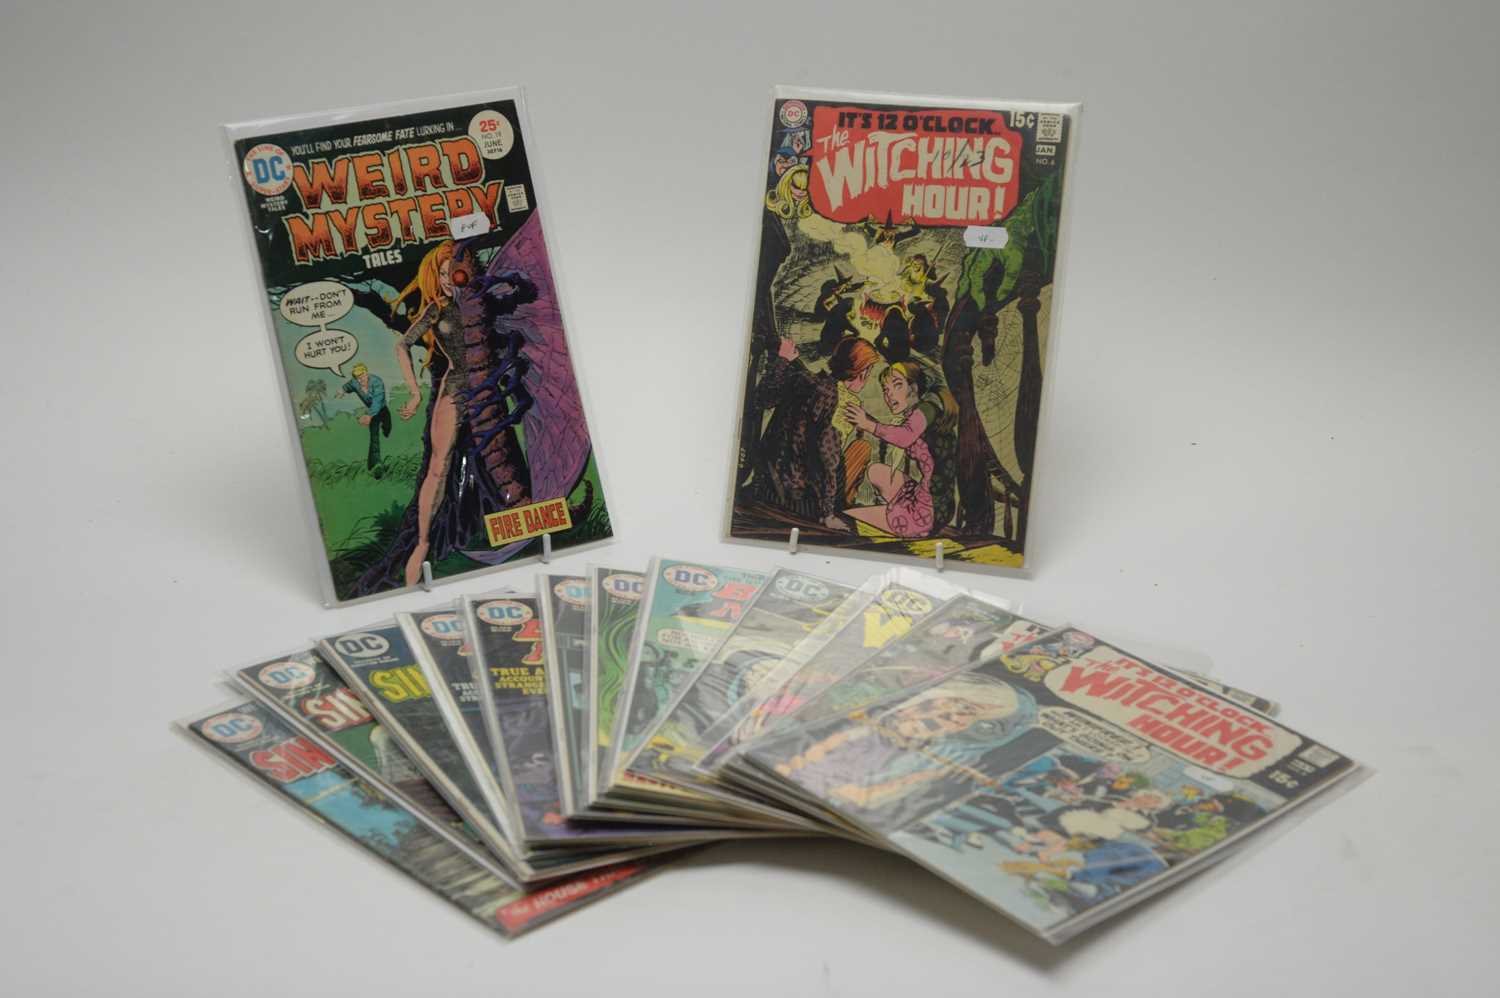 Lot 343 - Weird Mystery; Bewitching Hour! and others.